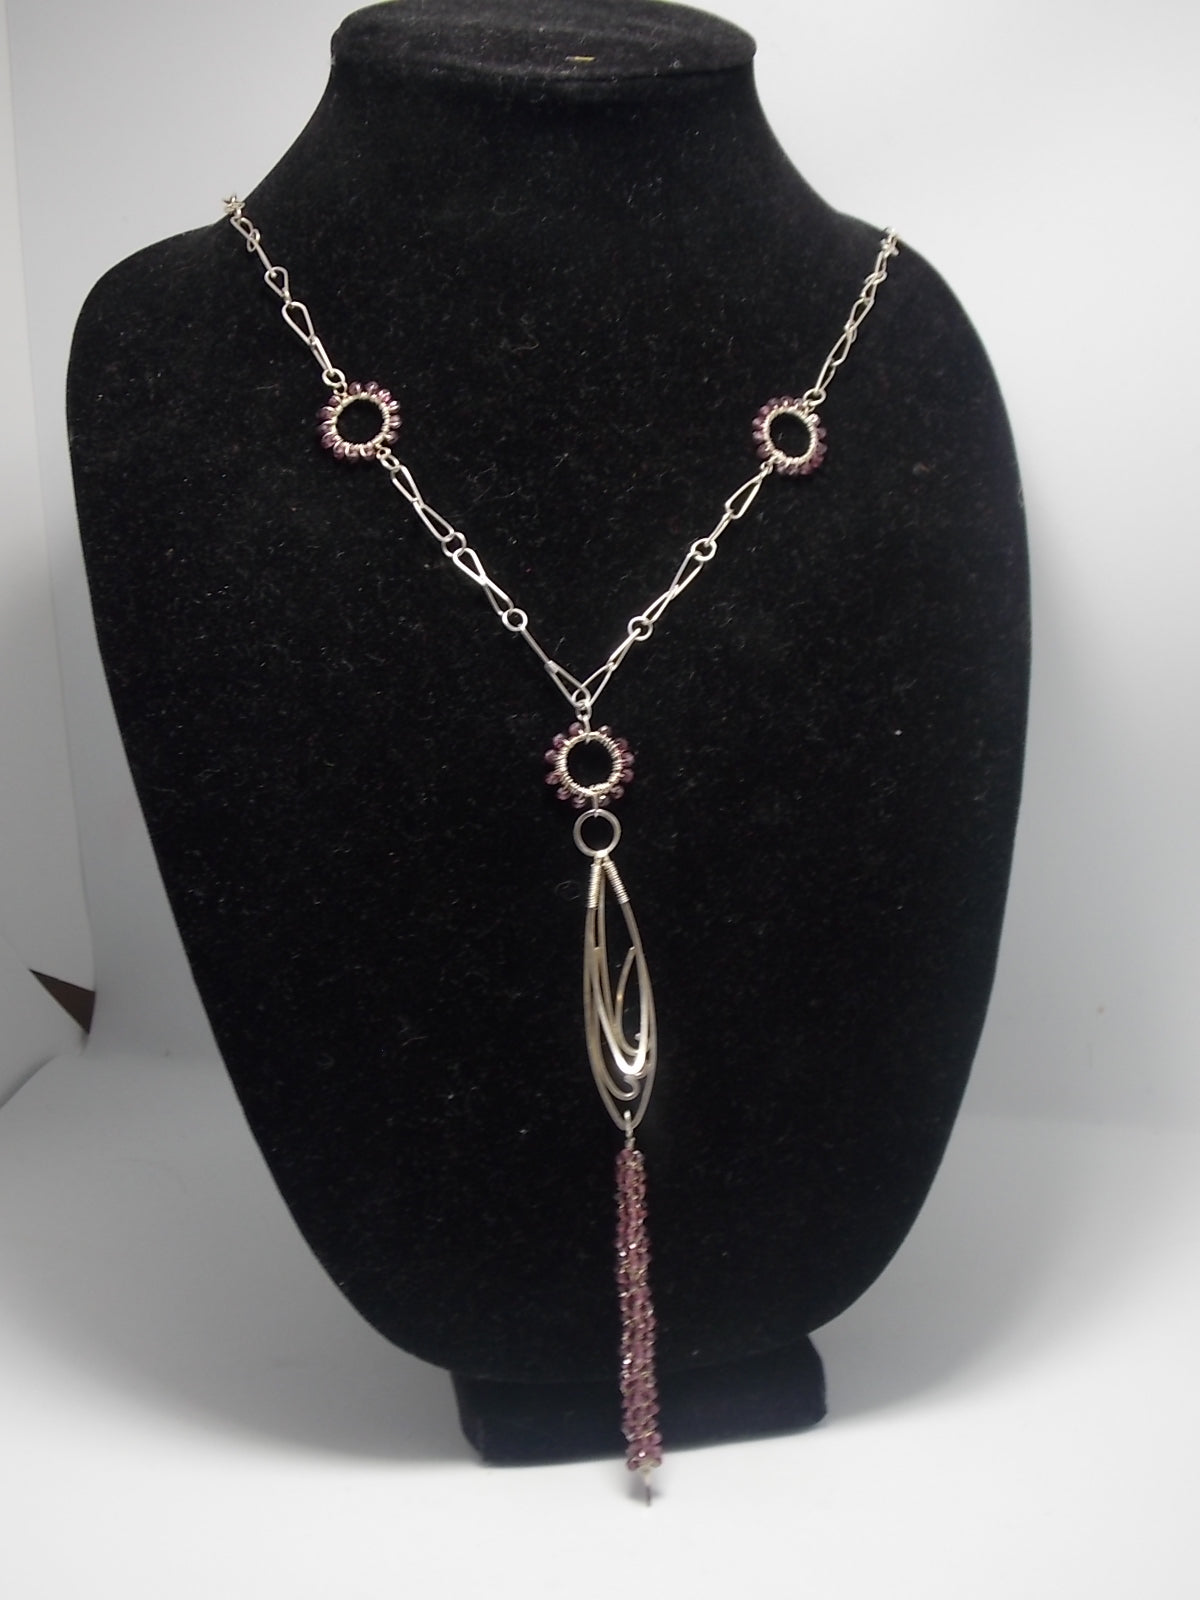 Sterling silver and rodolite garnet necklace by Balbina Meyer